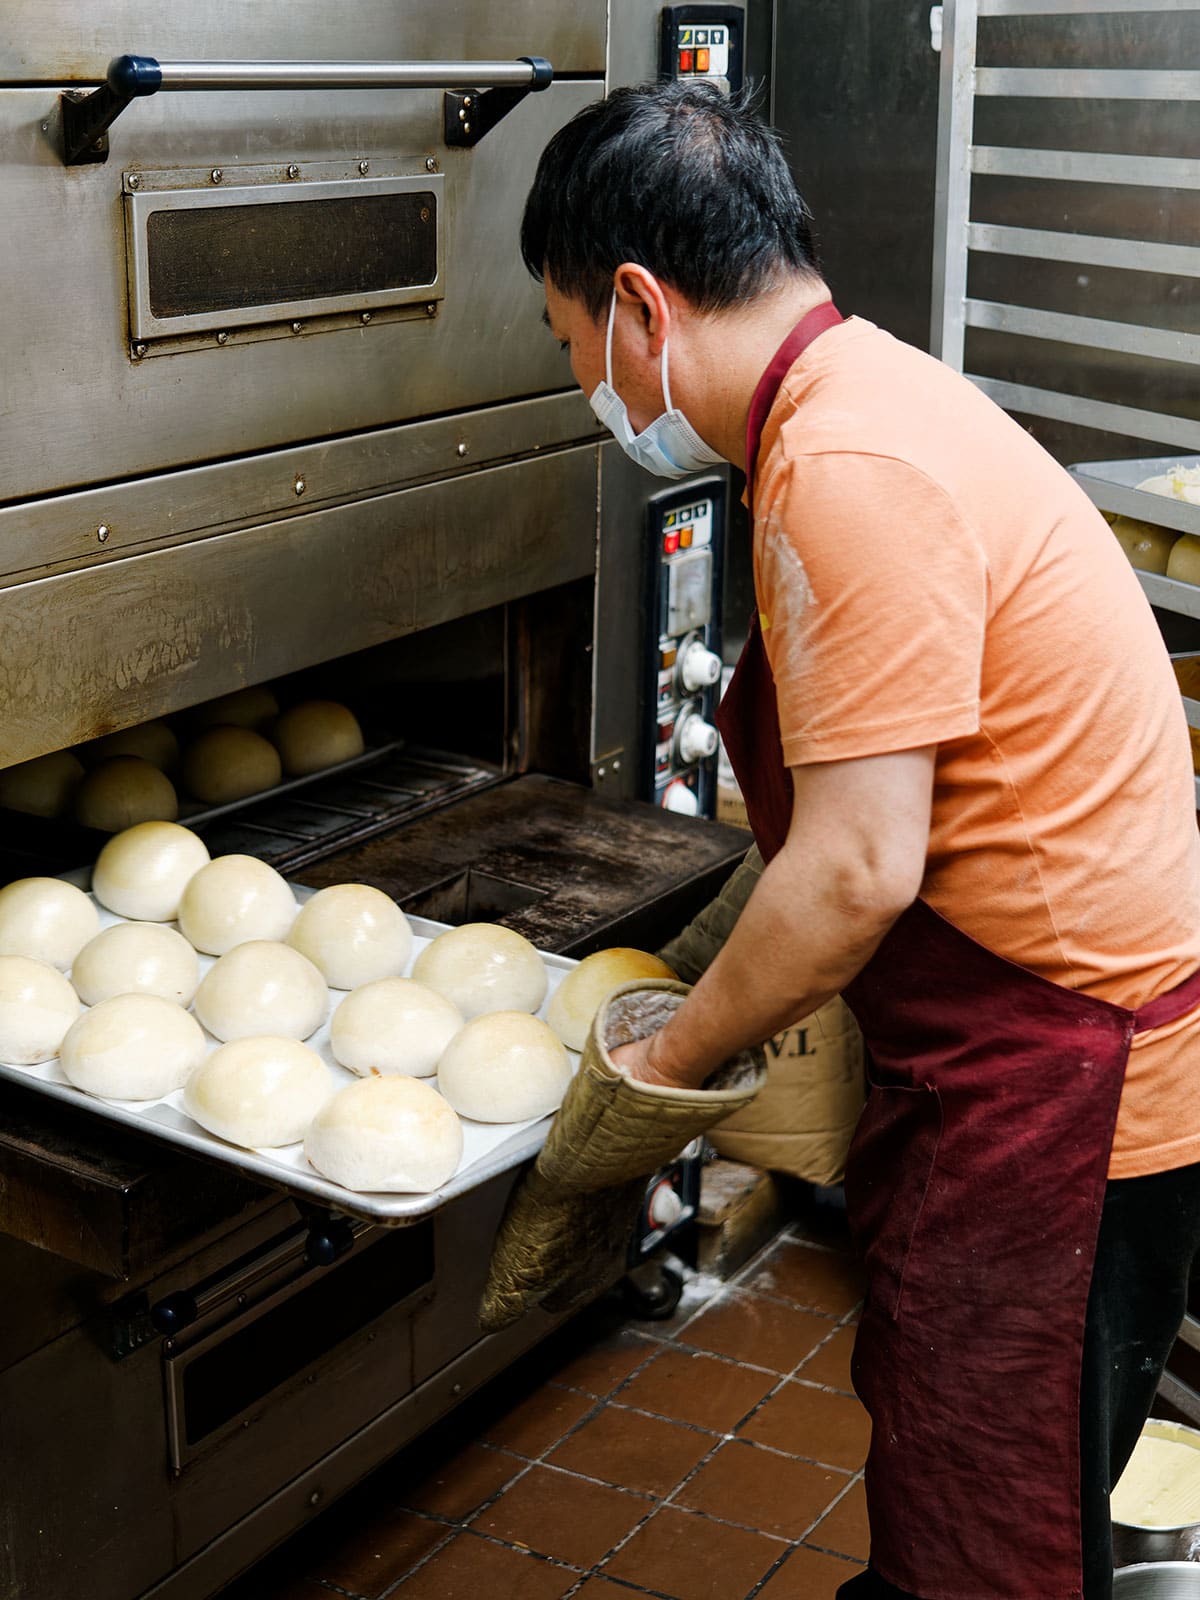 Baker puts a tray of BBQ pork buns into the oven.